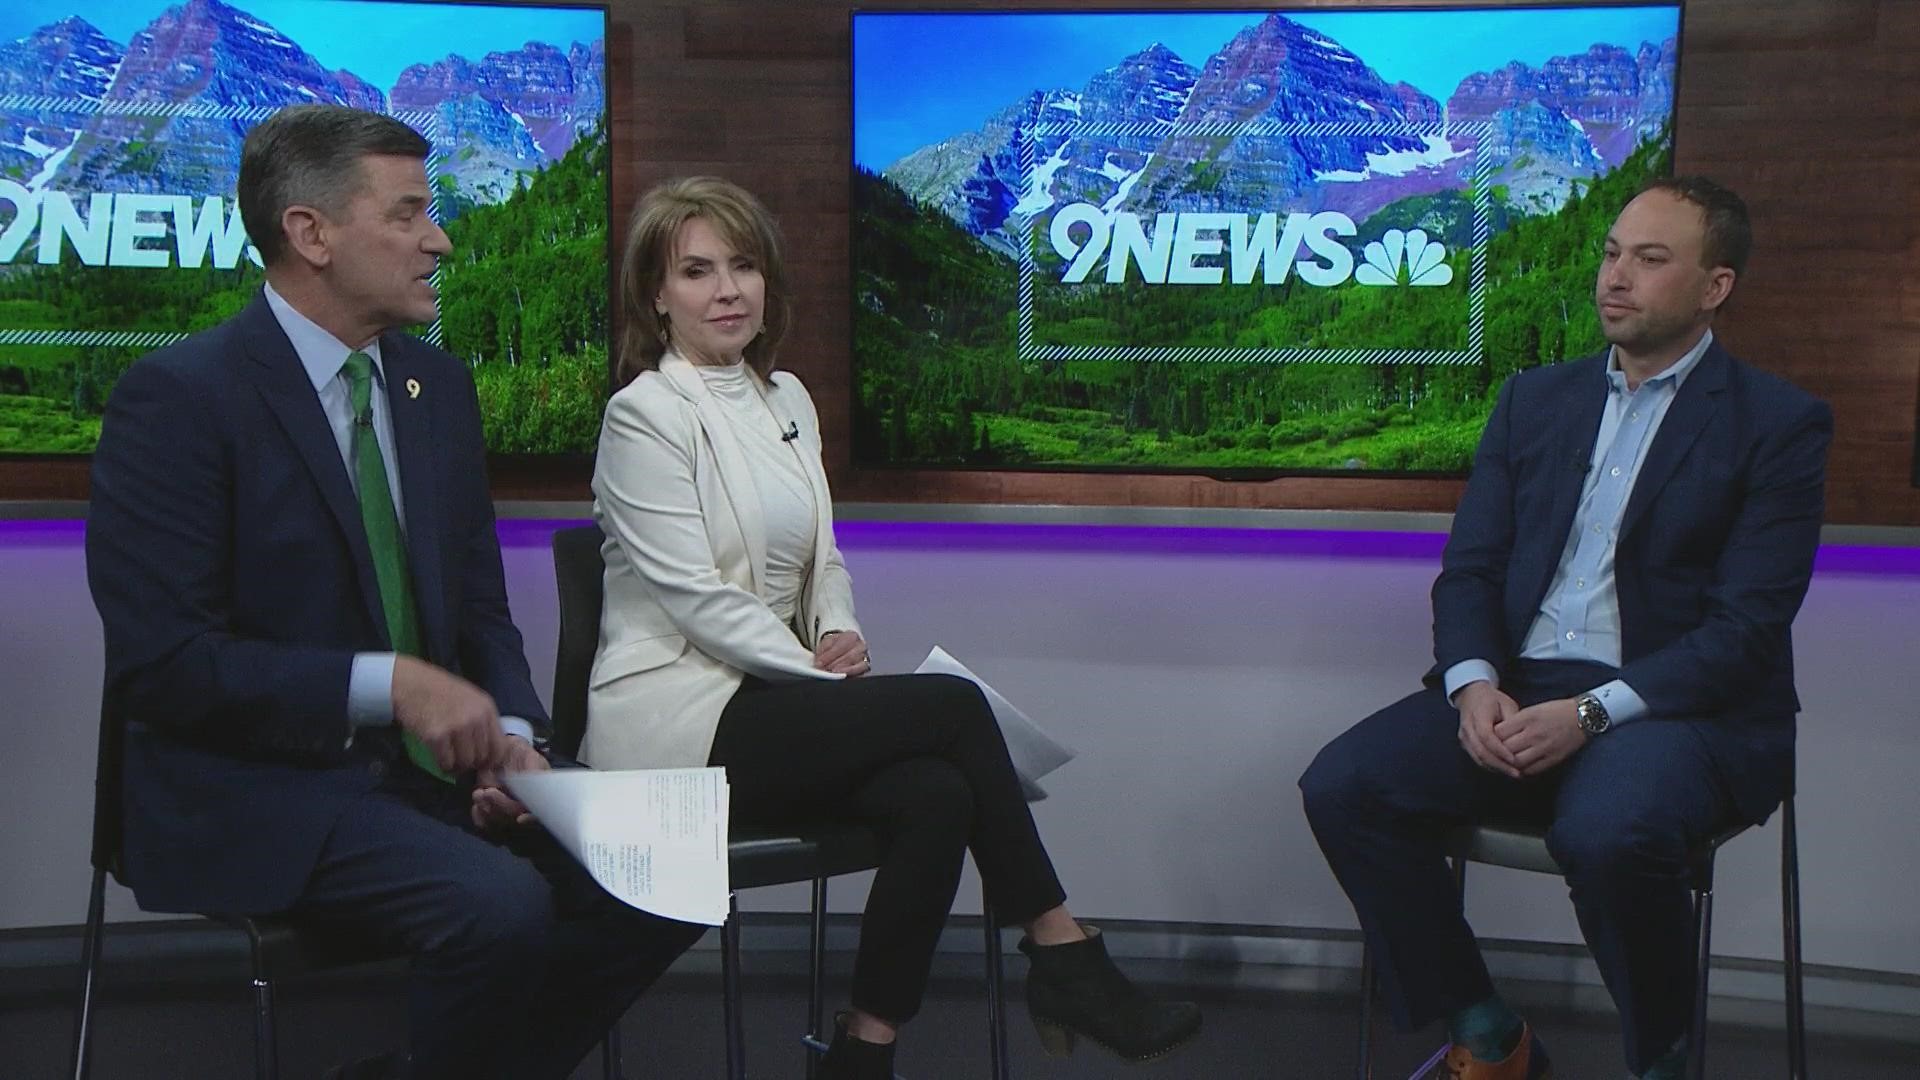 Andrew Abrams from the Denver Metro Association of Realtors joins us to talk about Denver's housing market.